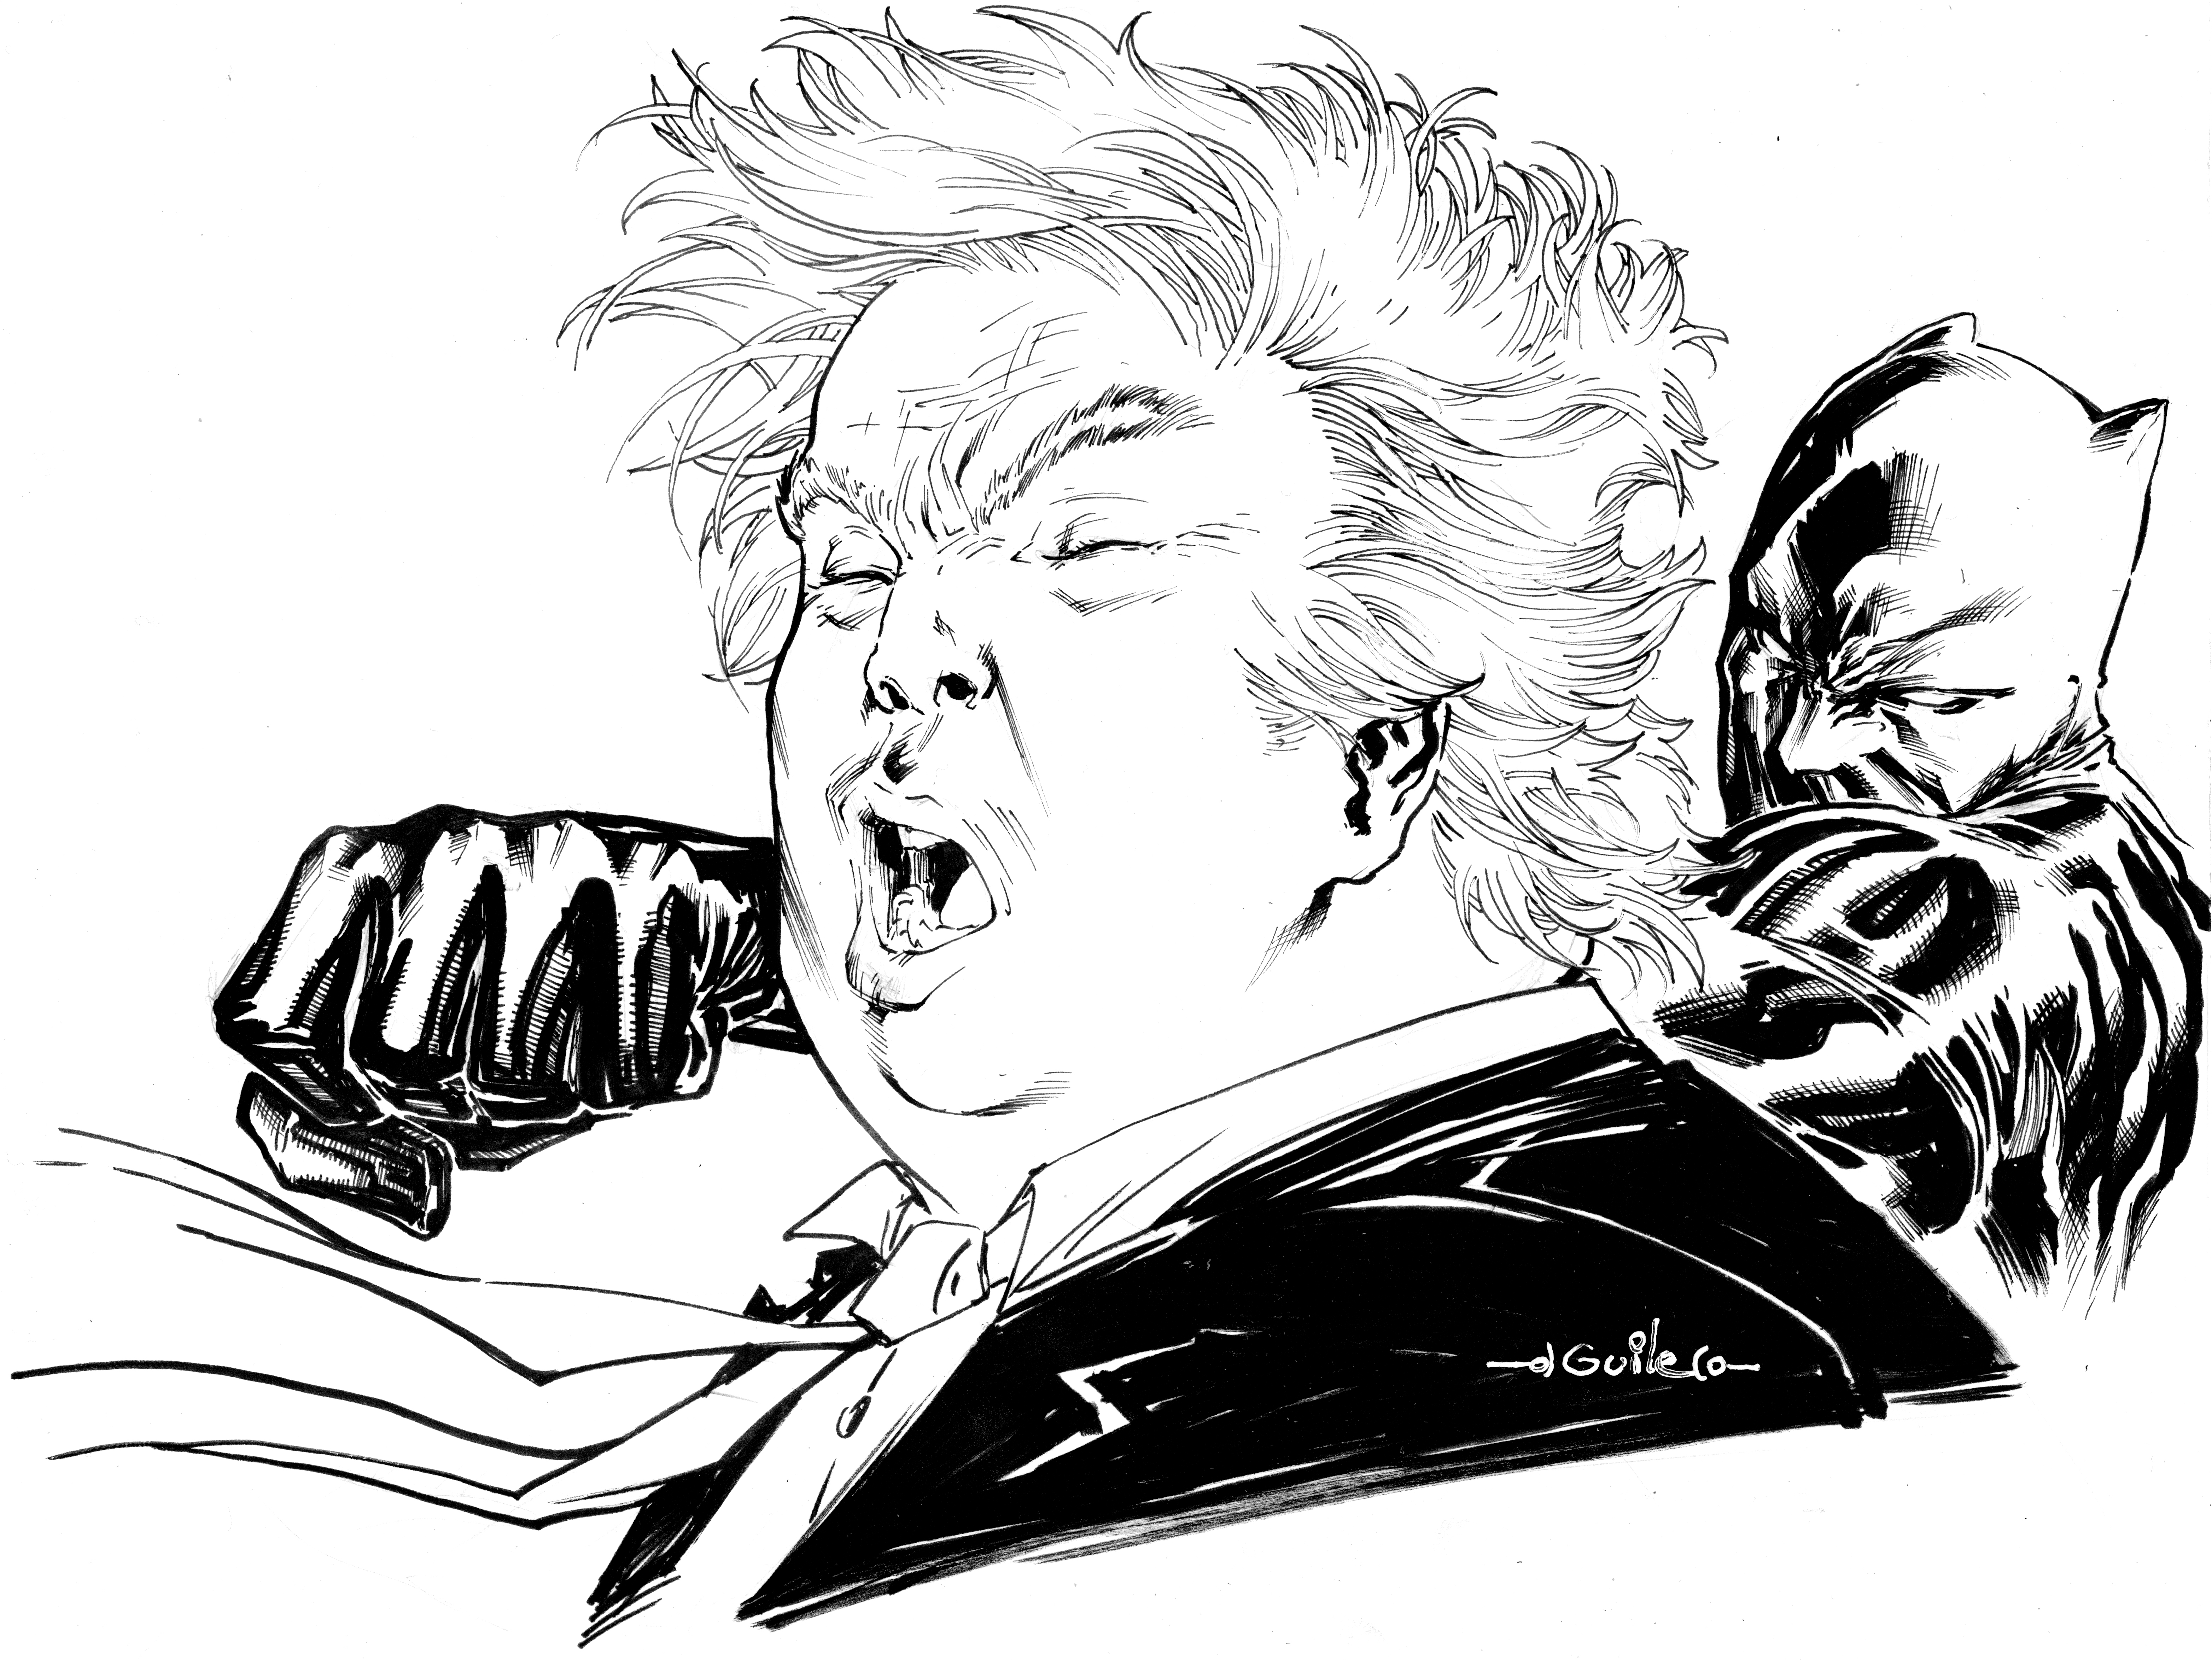 Black Panther vs Donald Trump by Guile Sharp